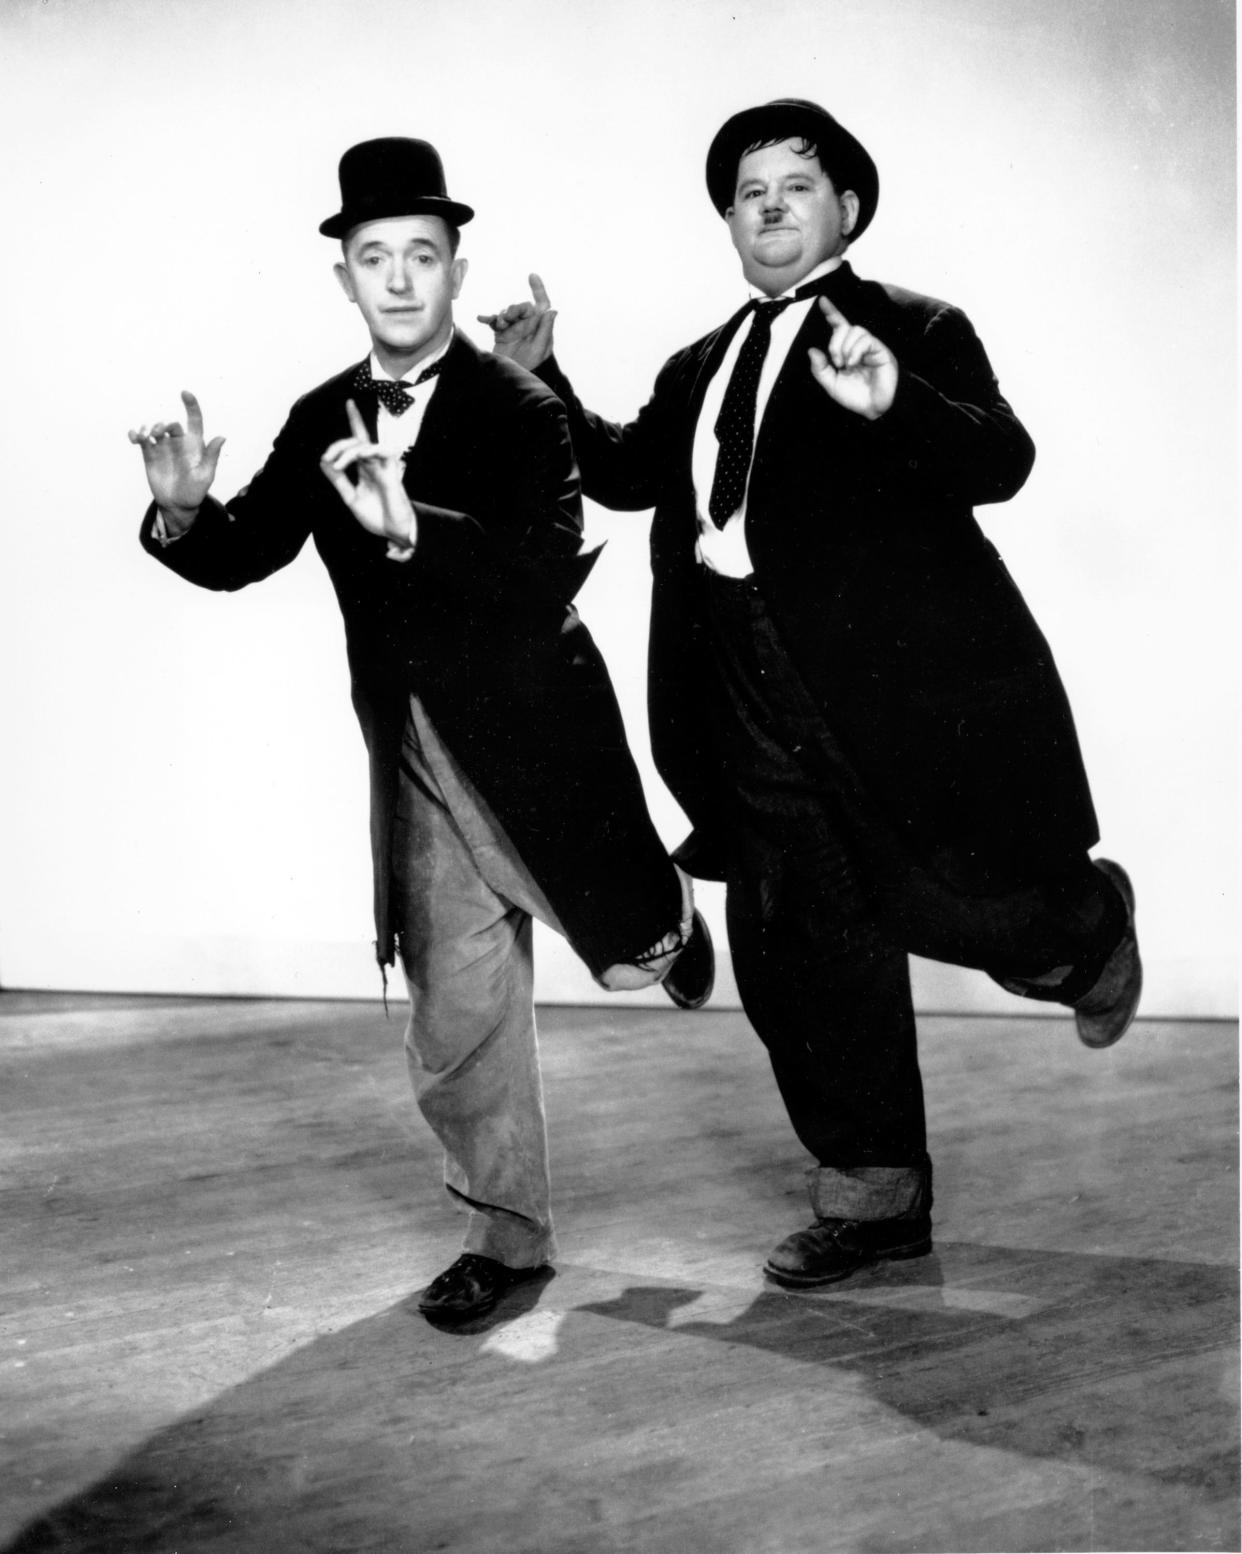 This is a 1936 photo of comedic actors Stan Laurel, left, and Oliver Hardy.